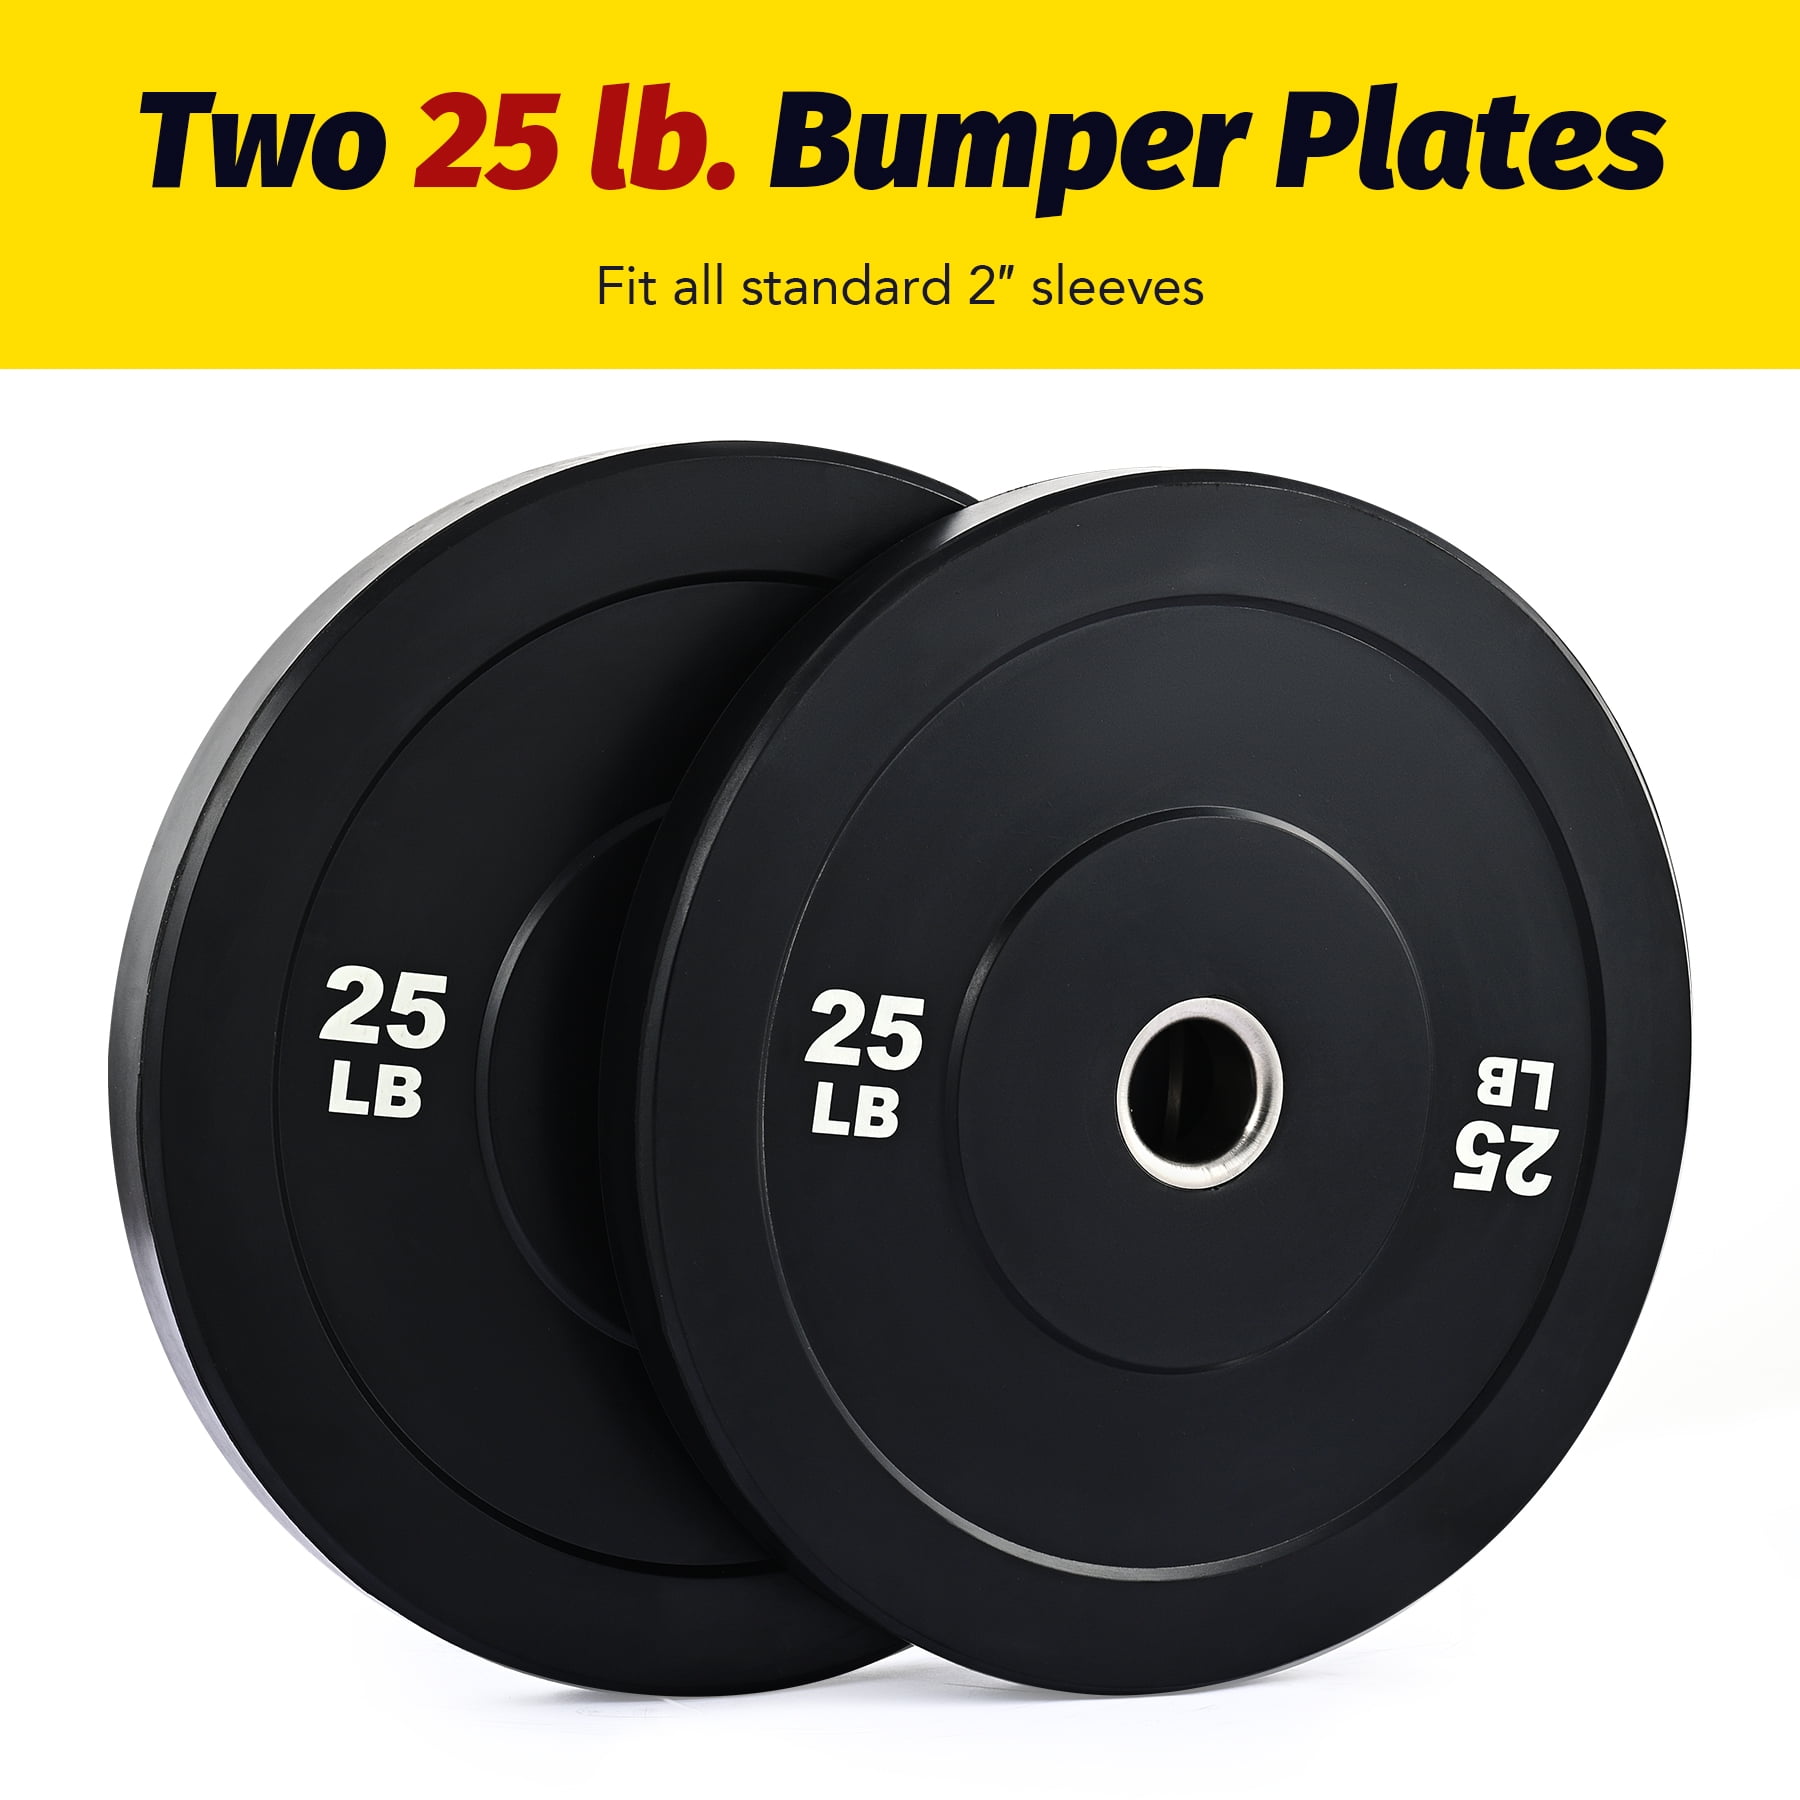 Weightlifting Ideal for Cross-Training Single Fitness and Gym Weights One Rubber Weight Plate in Pounds for Olympic Barbells HD Bumper Plates 2 1 - 10LB / 15LB / 25LB / 35LB / 45LB 